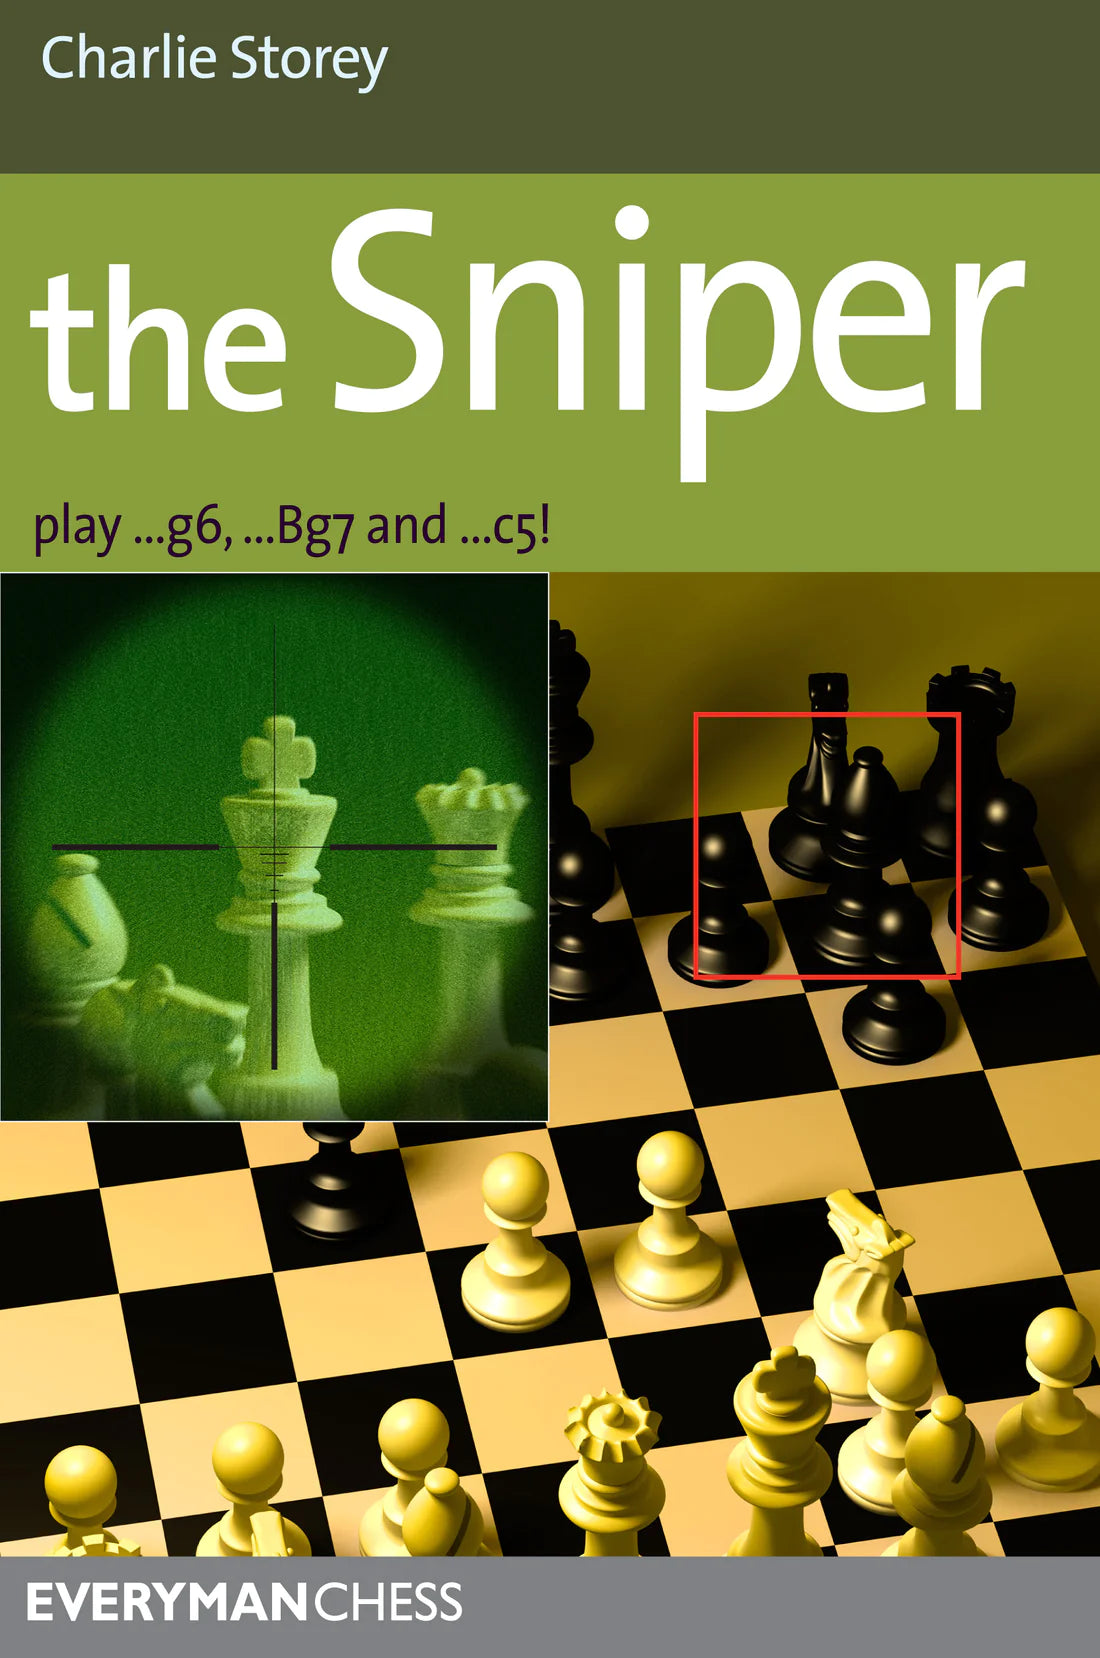 Storey: The Sniper Play 1...g6, ...Bg7, and ...c5!